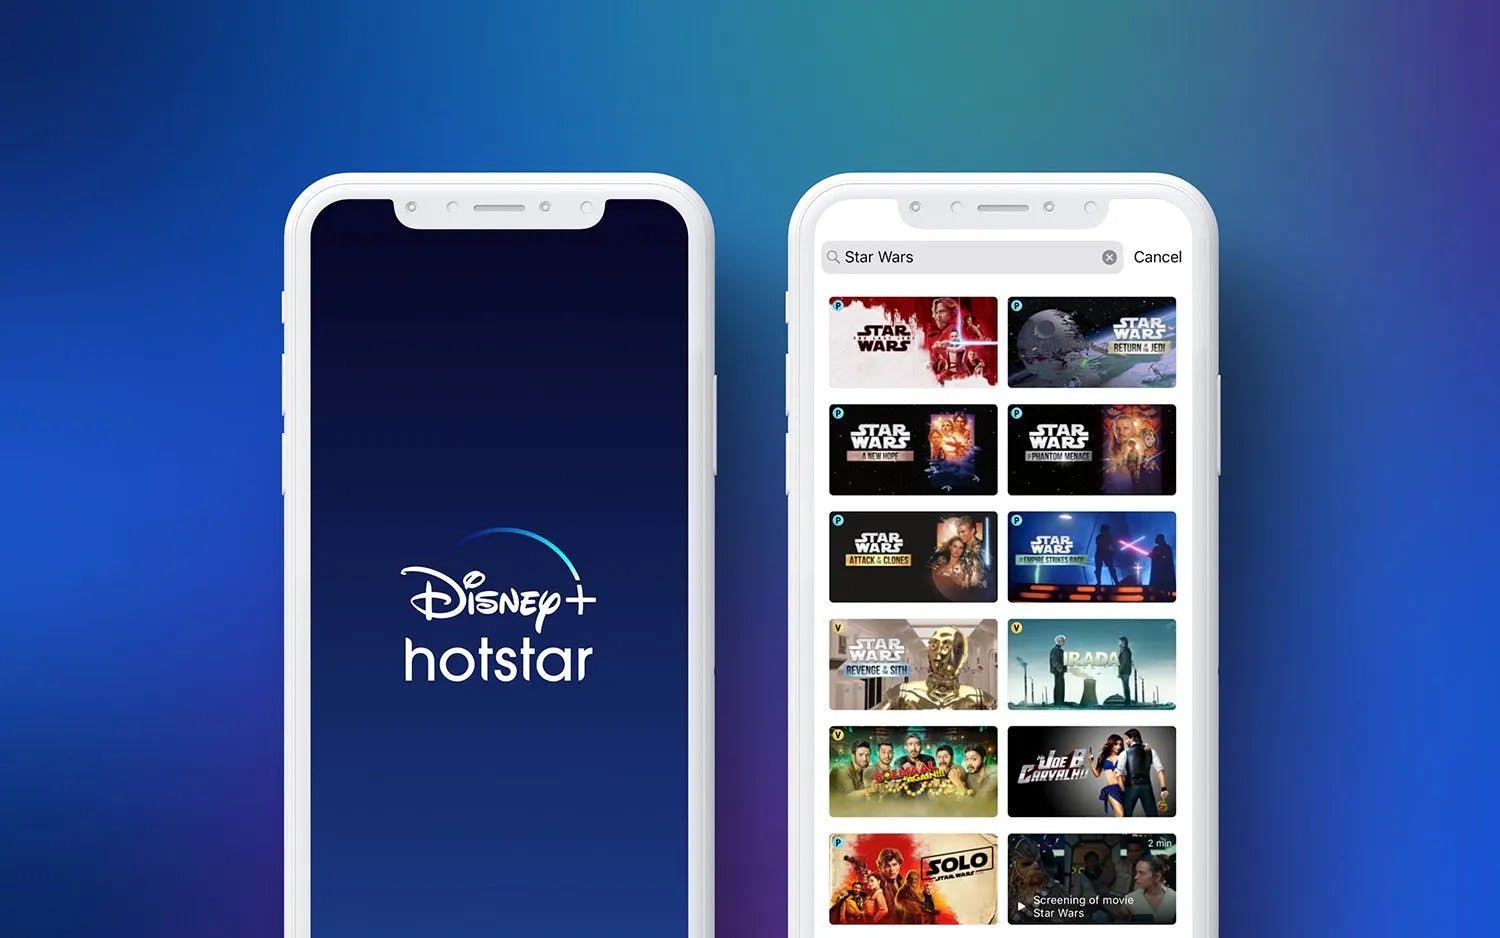 Disney+Hotstar: From Clear Insights to Sticky Customers